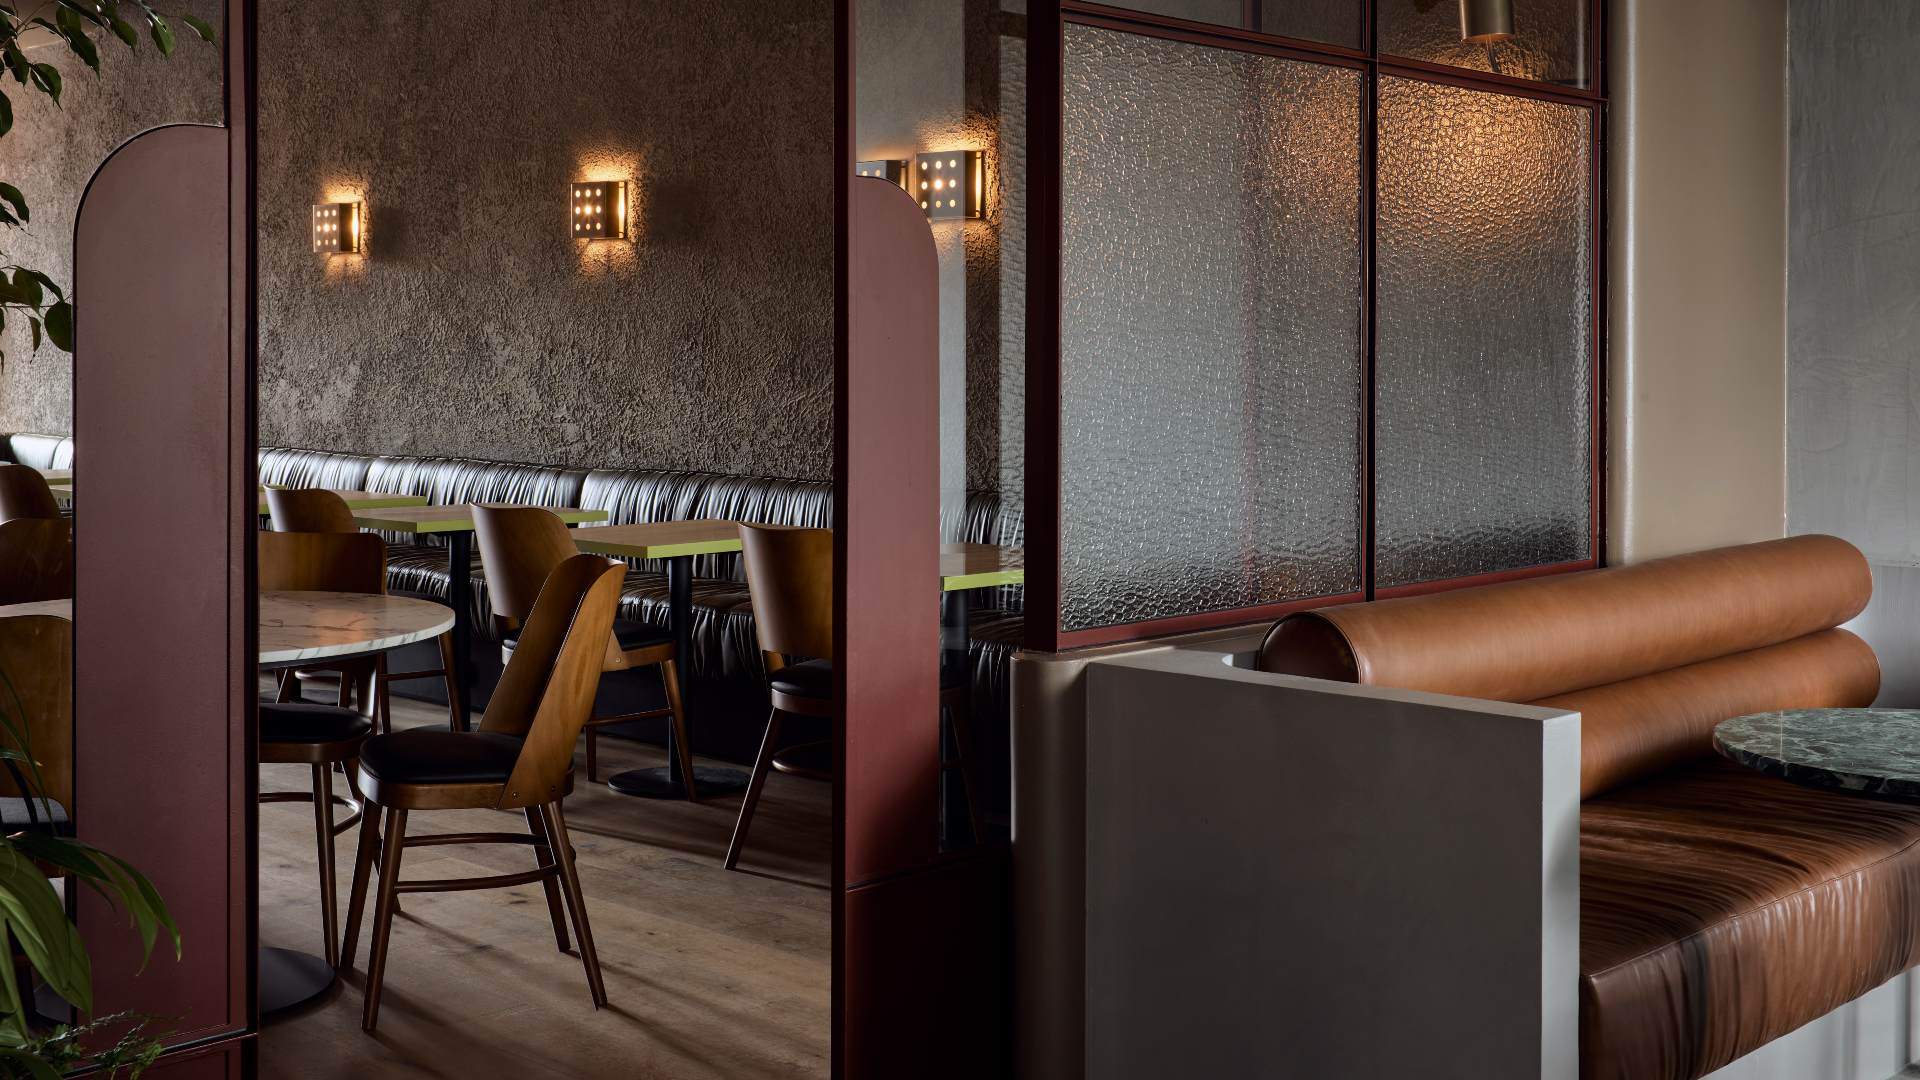 Untitled Is the New Modern Euro Bar and Restaurant From the Ugly Duckling Crew